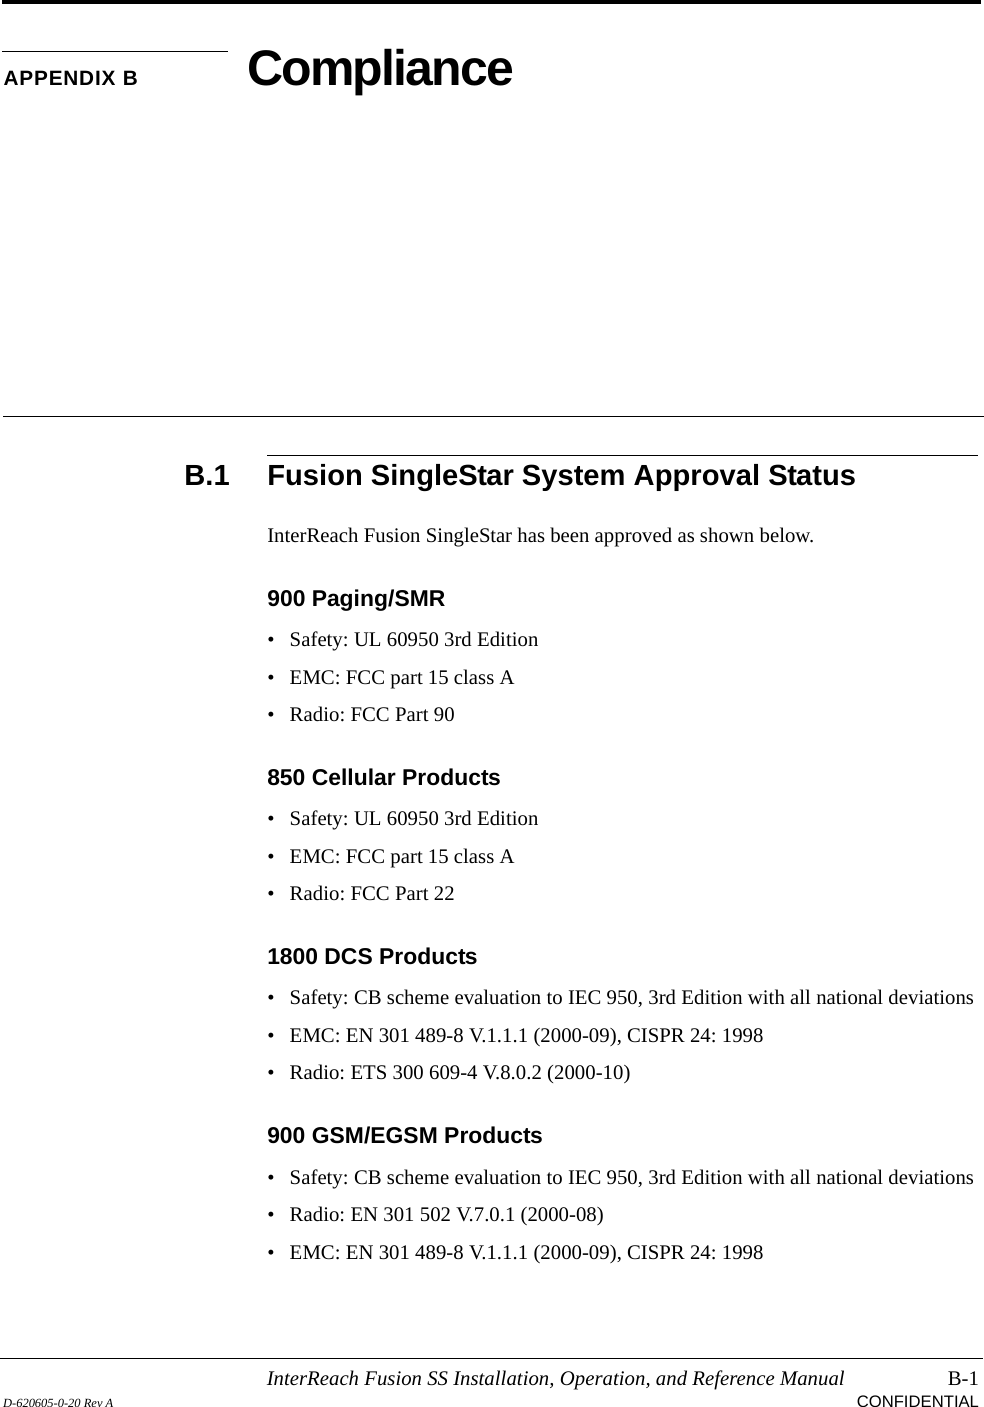 InterReach Fusion SS Installation, Operation, and Reference Manual B-1D-620605-0-20 Rev A CONFIDENTIALAPPENDIX B ComplianceB.1 Fusion SingleStar System Approval StatusInterReach Fusion SingleStar has been approved as shown below.900 Paging/SMR• Safety: UL 60950 3rd Edition• EMC: FCC part 15 class A• Radio: FCC Part 90850 Cellular Products• Safety: UL 60950 3rd Edition• EMC: FCC part 15 class A• Radio: FCC Part 221800 DCS Products• Safety: CB scheme evaluation to IEC 950, 3rd Edition with all national deviations• EMC: EN 301 489-8 V.1.1.1 (2000-09), CISPR 24: 1998• Radio: ETS 300 609-4 V.8.0.2 (2000-10)900 GSM/EGSM Products• Safety: CB scheme evaluation to IEC 950, 3rd Edition with all national deviations• Radio: EN 301 502 V.7.0.1 (2000-08)• EMC: EN 301 489-8 V.1.1.1 (2000-09), CISPR 24: 1998